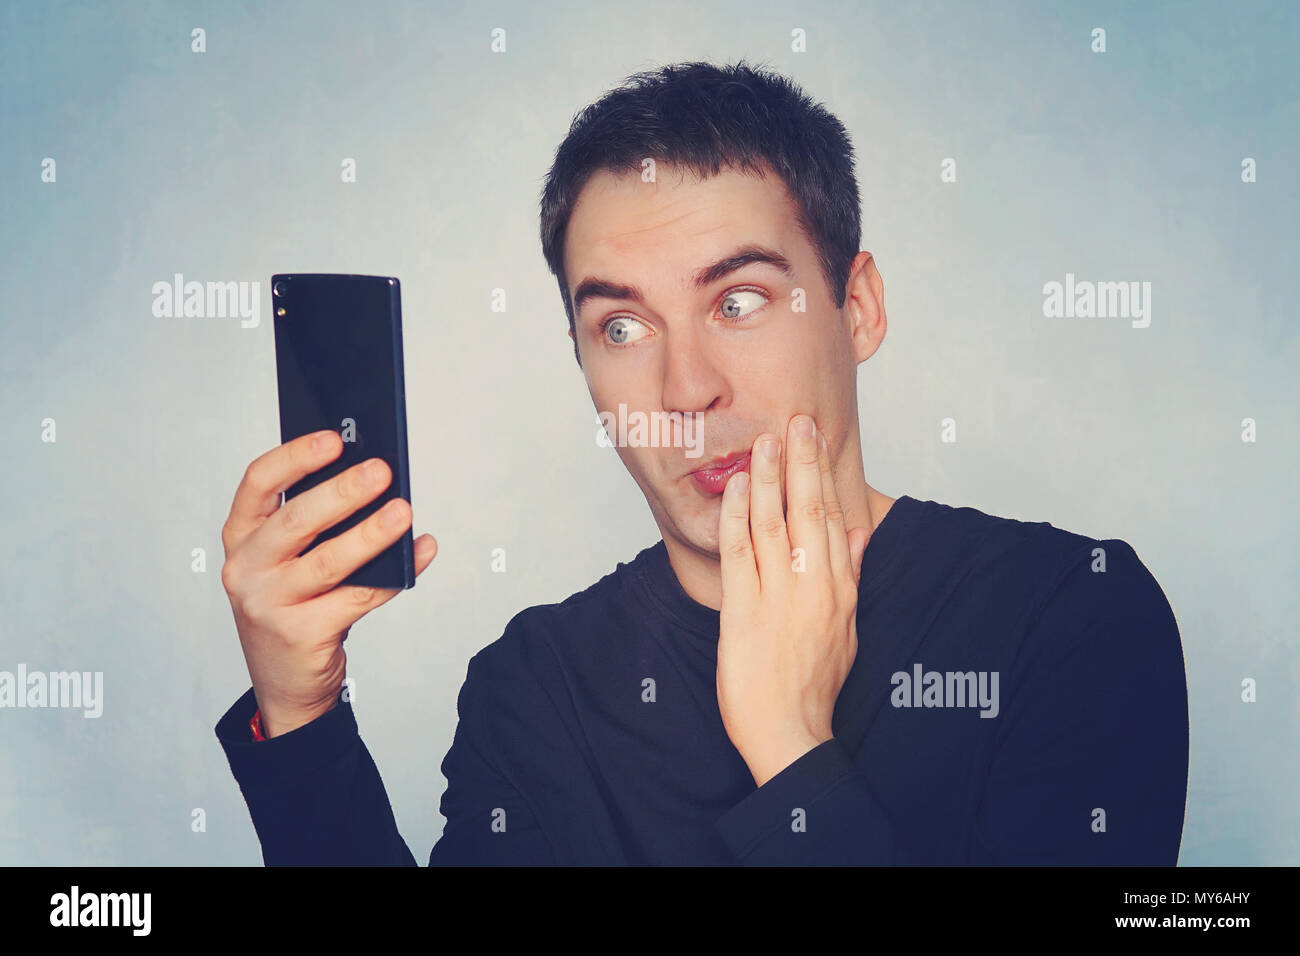 Closeup portrait of handsome young man shocked surprised, open mouth and eyes, by what he sees on his cell phone, on blue background. Negative human e Stock Photo